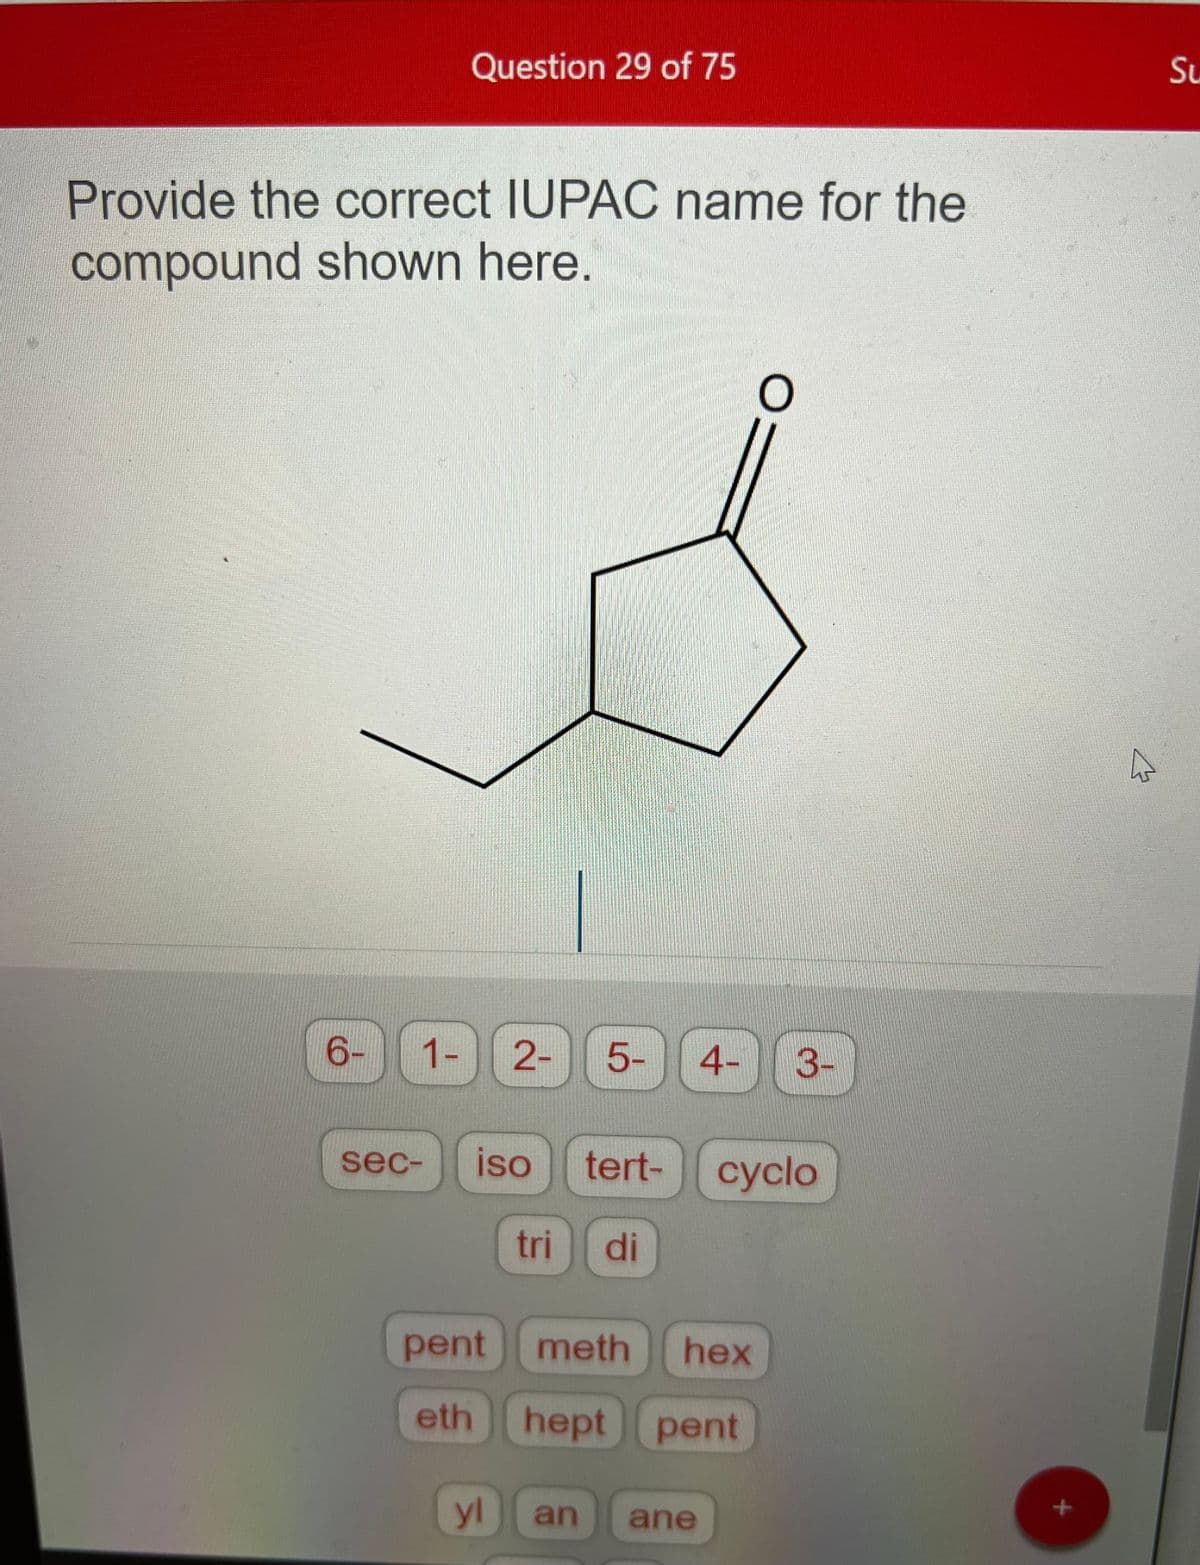 Question 29 of 75
Provide the correct IUPAC name for the
compound shown here.
6-
1- 2- 5- 4-
pent meth
eth
sec- iso tert- cyclo
tri di
yl
hex
hept pent
O
an ane
3-
Su